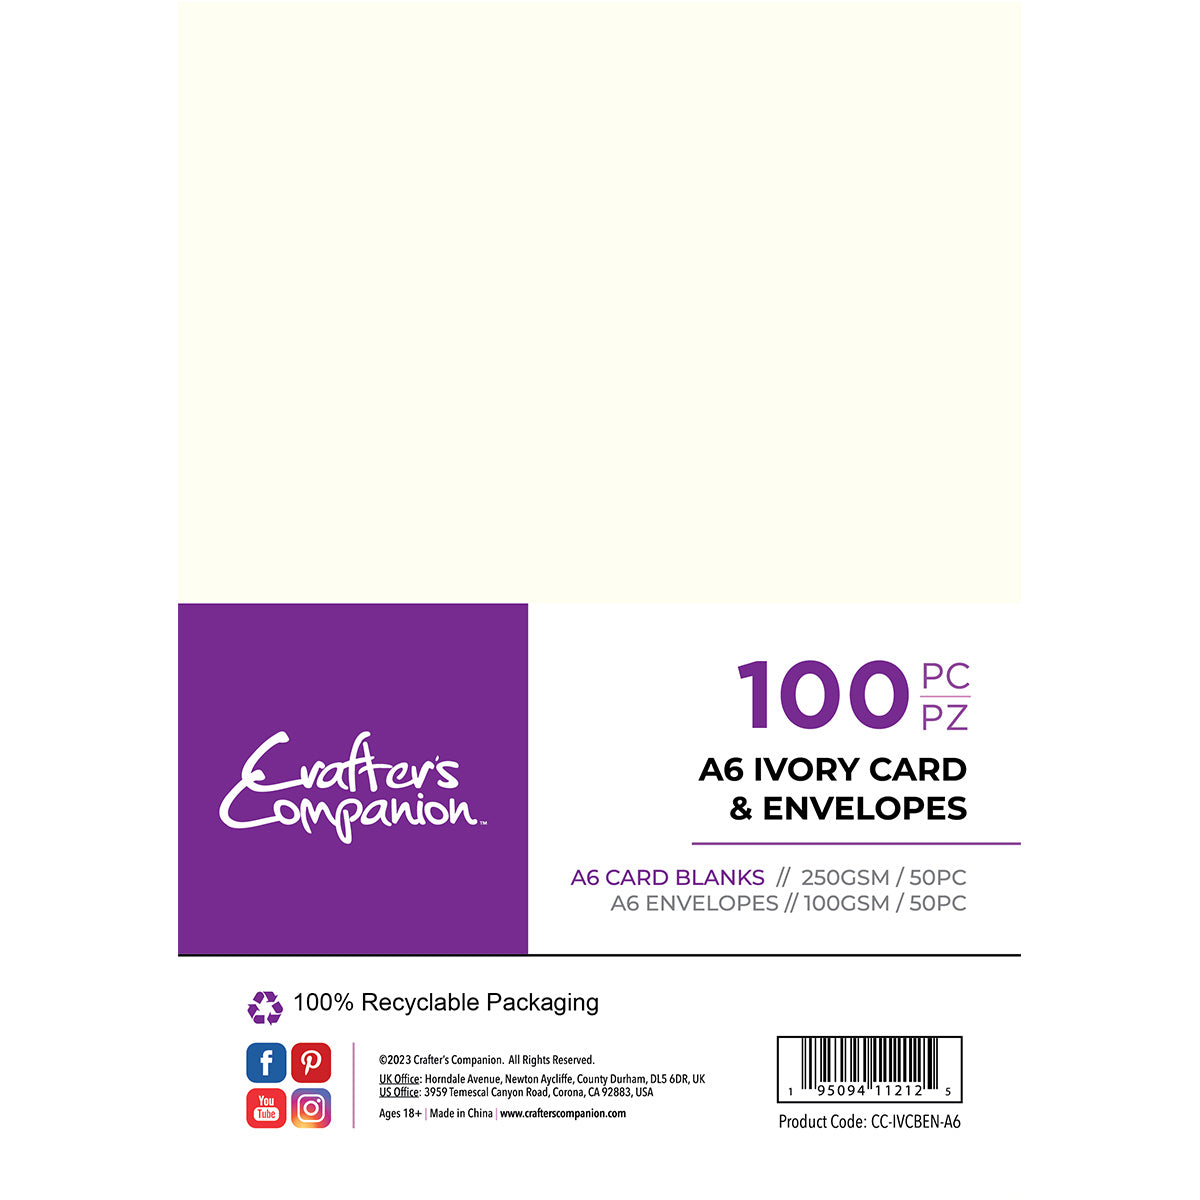 Crafter's Companion - A6 Cards & Envelopes 100 piece - Ivory